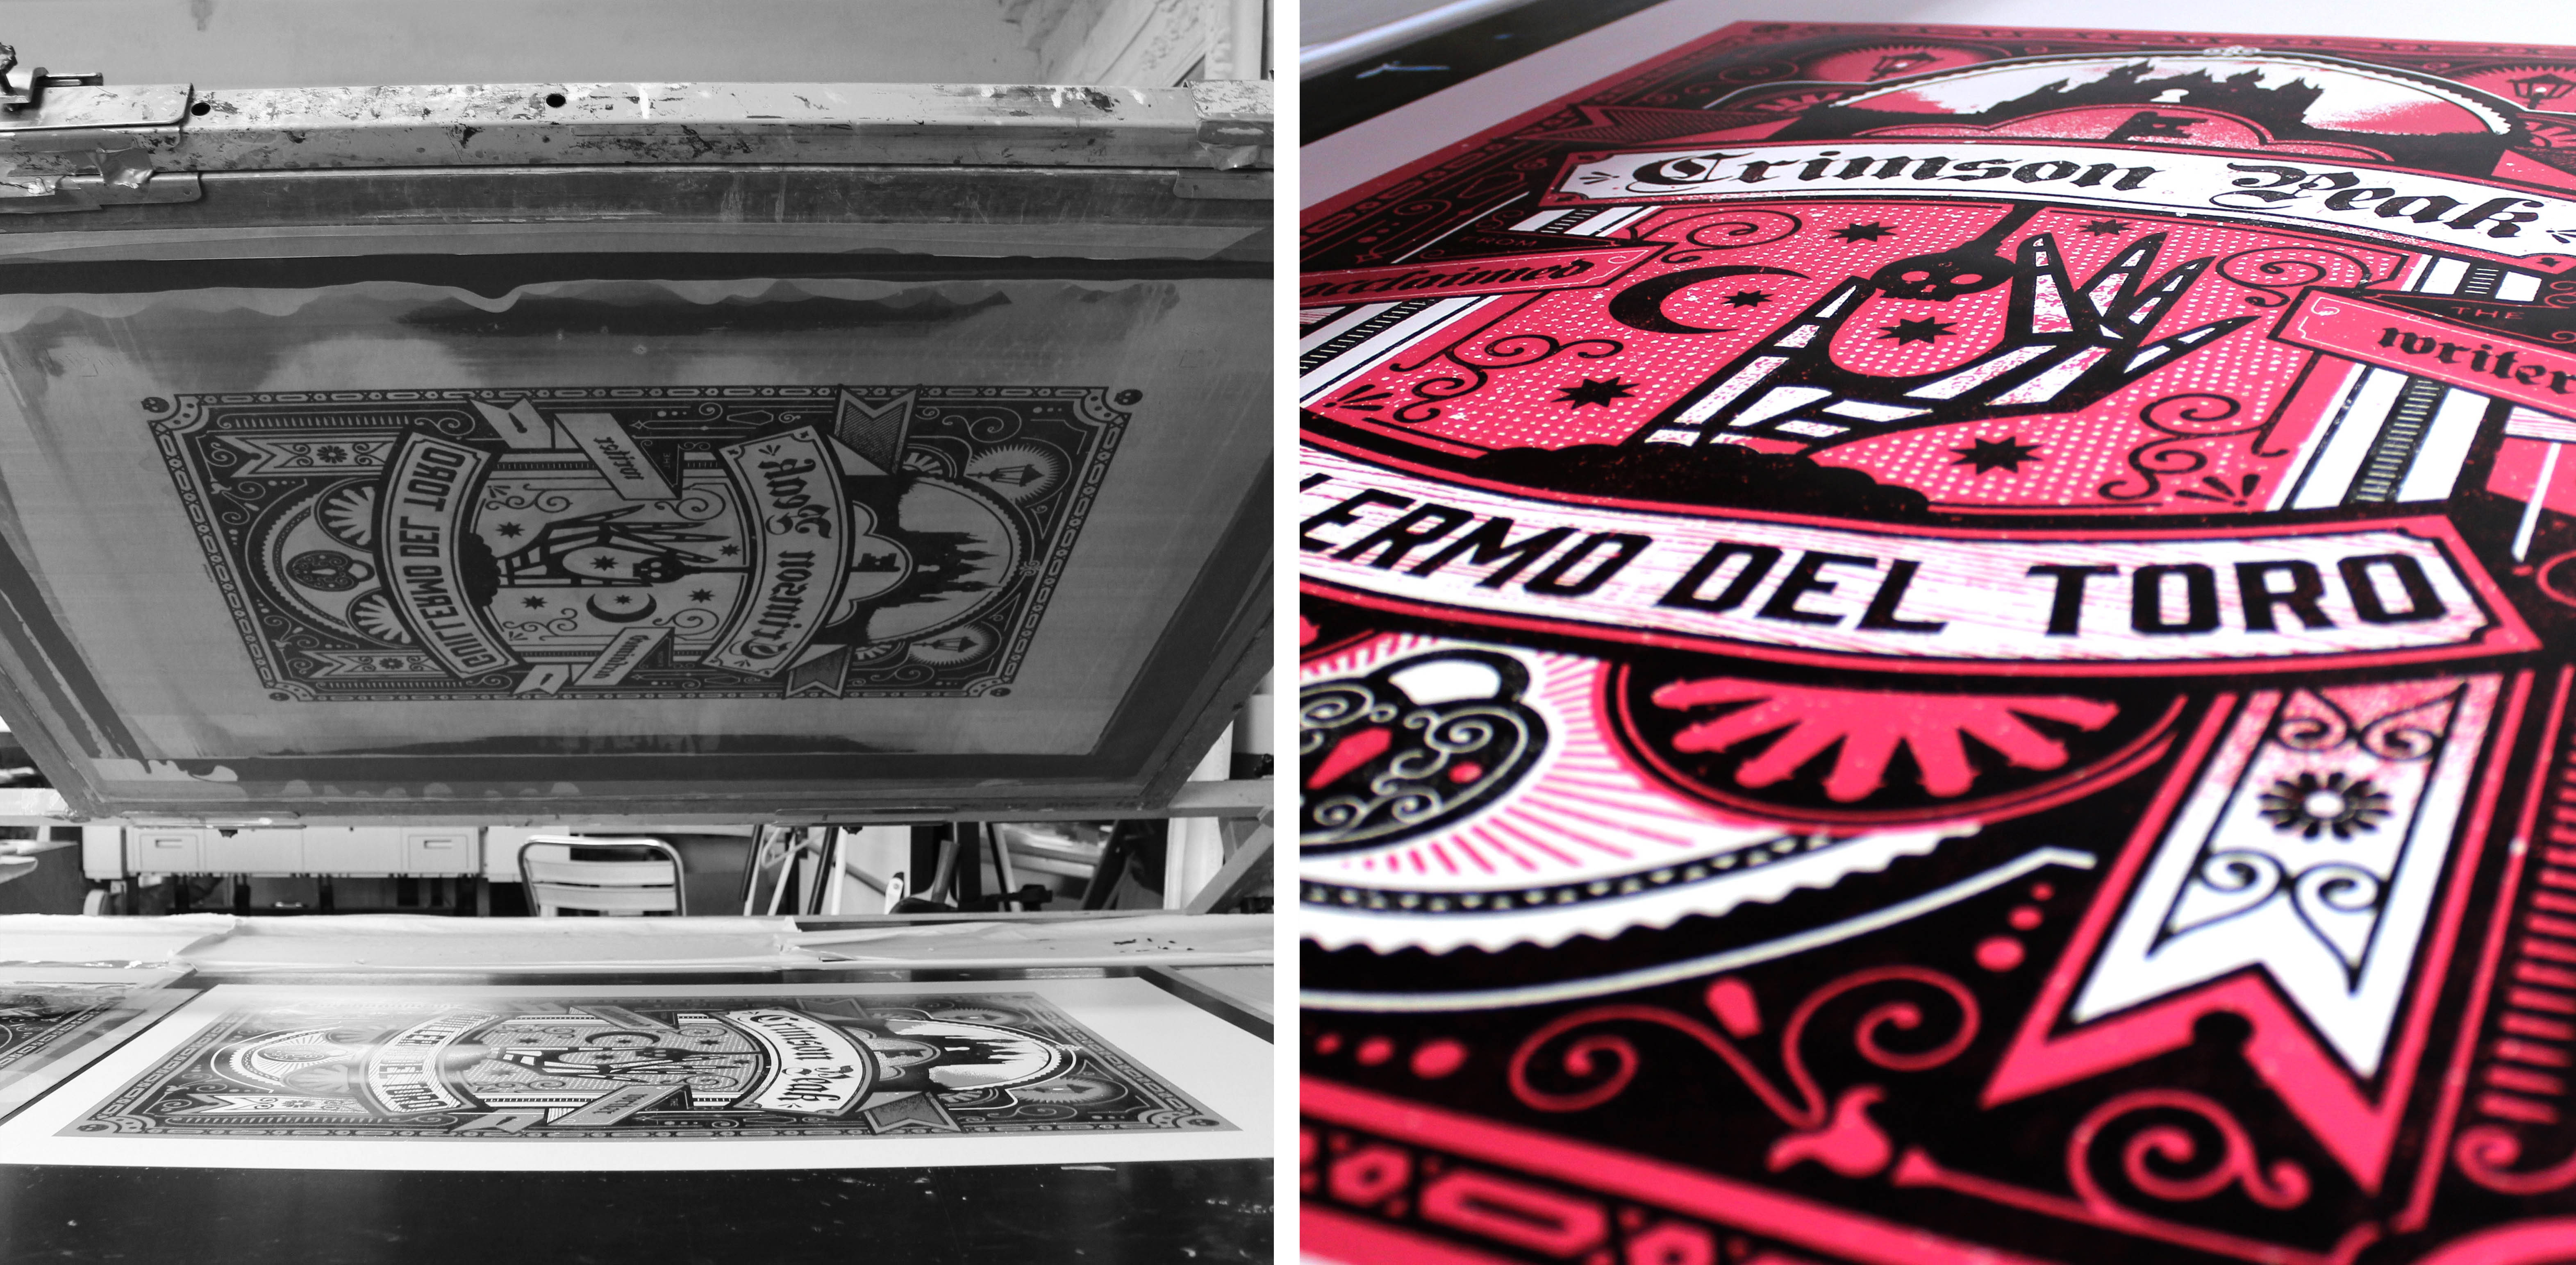 Telegramme screen print for The Great Guillermo